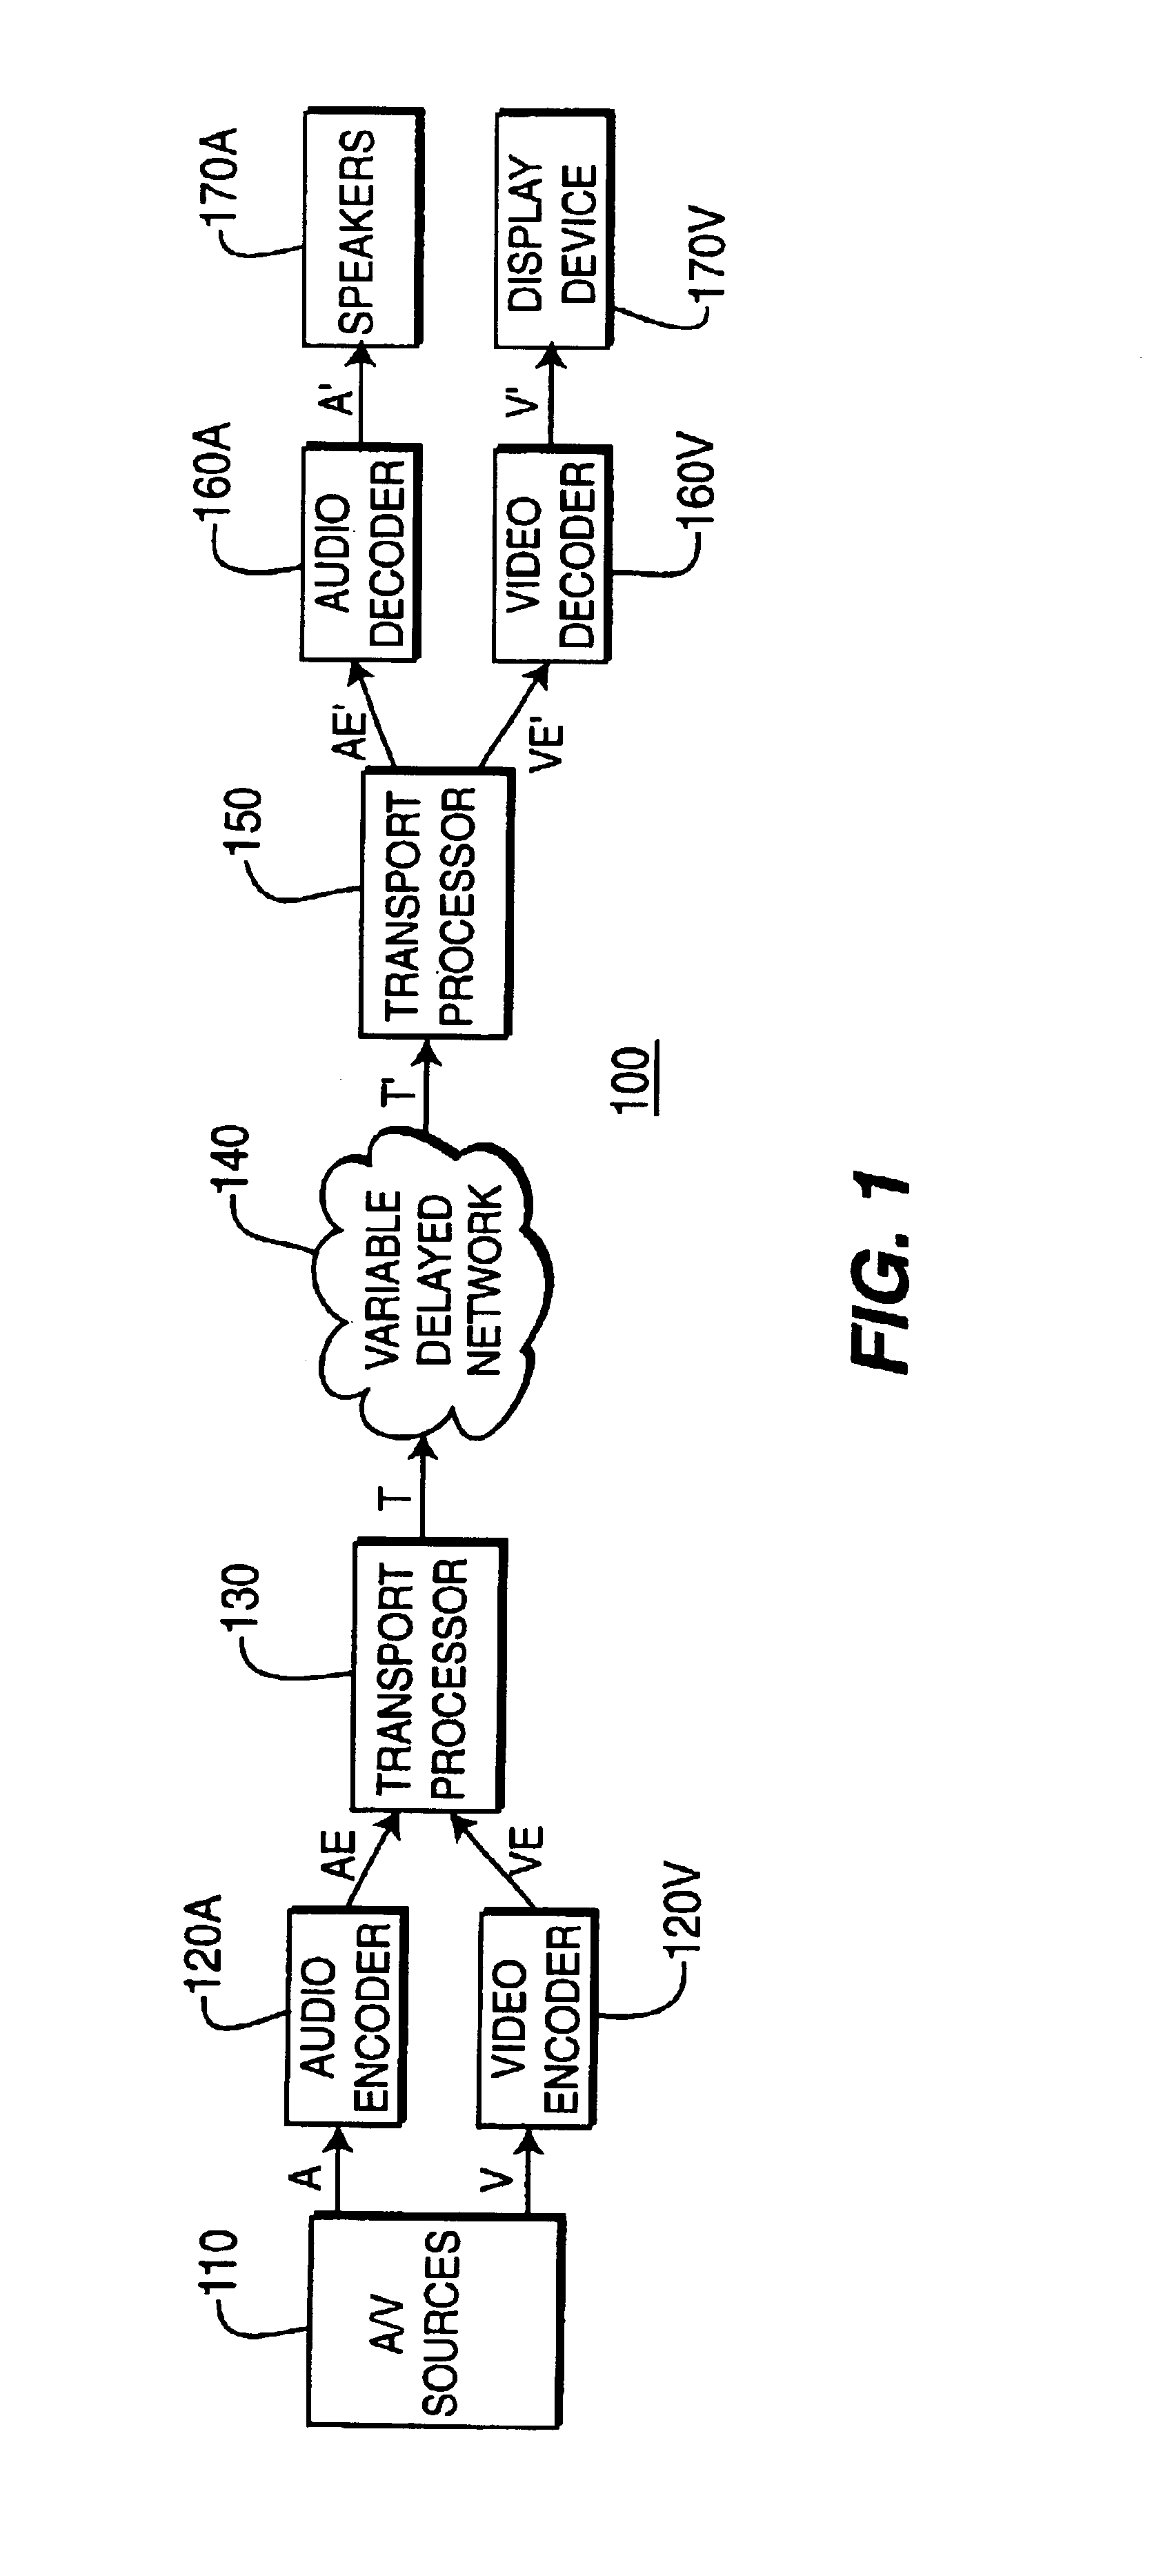 Apparatus and method for synchronization of audio and video streams